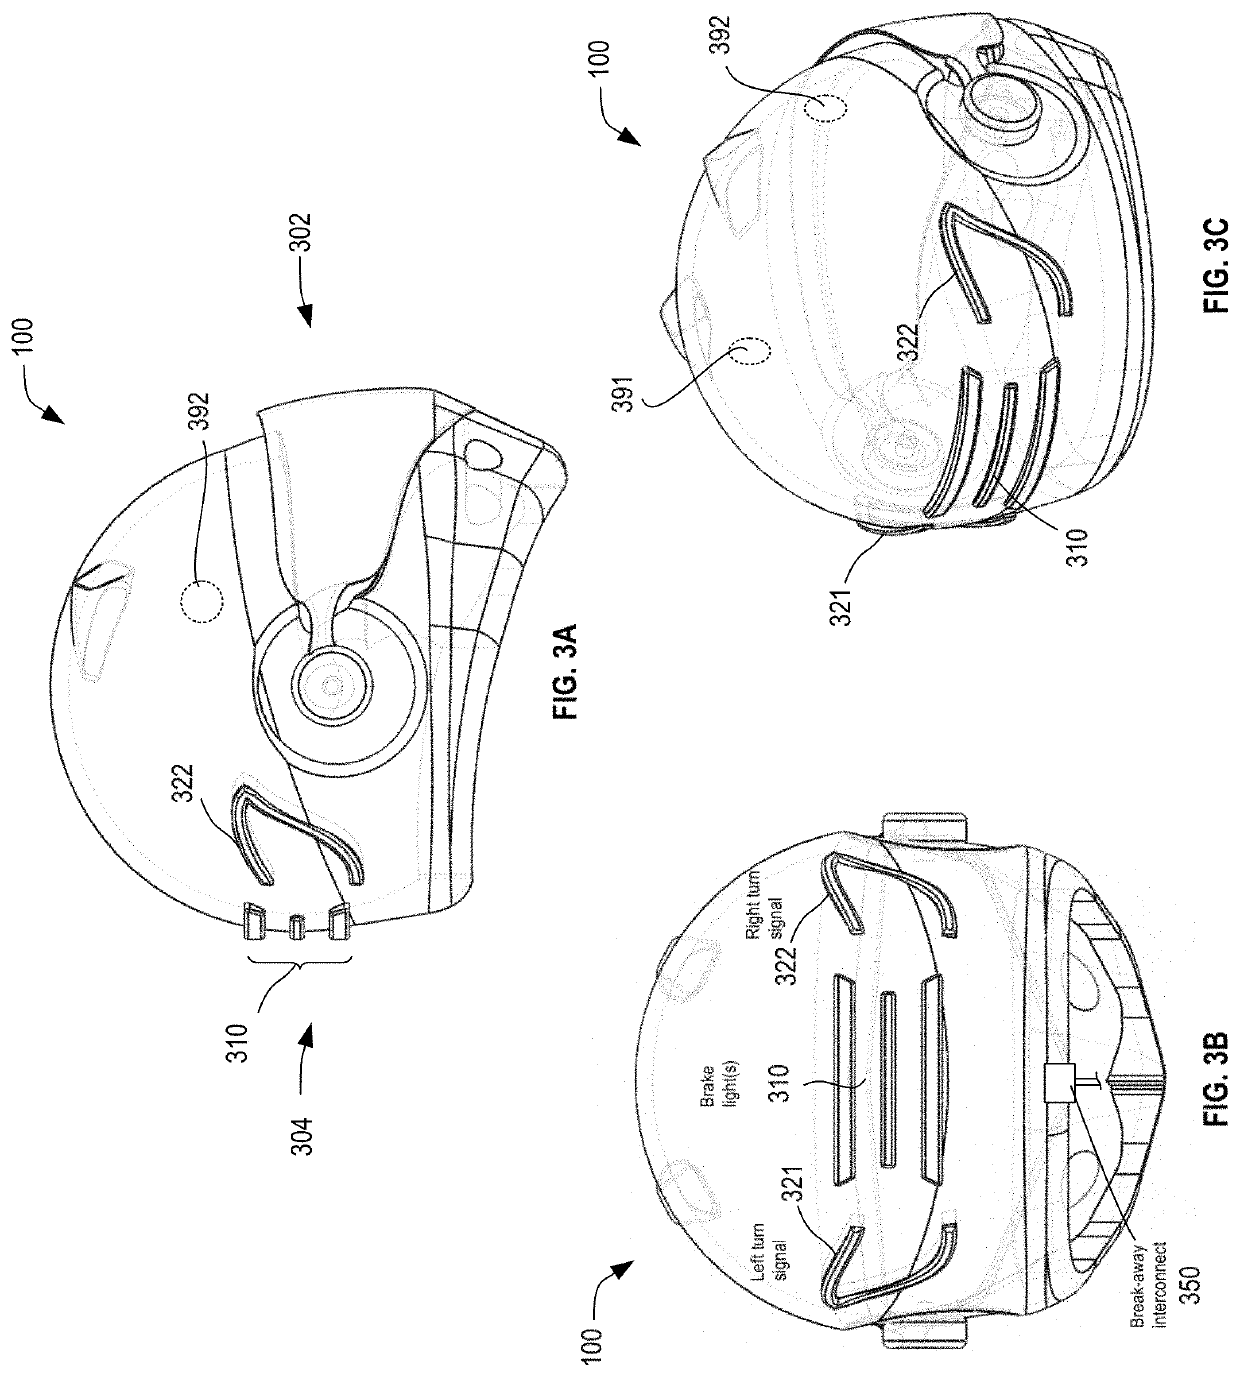 Systems and Methods for An Intelligent Motorcycle Helmet